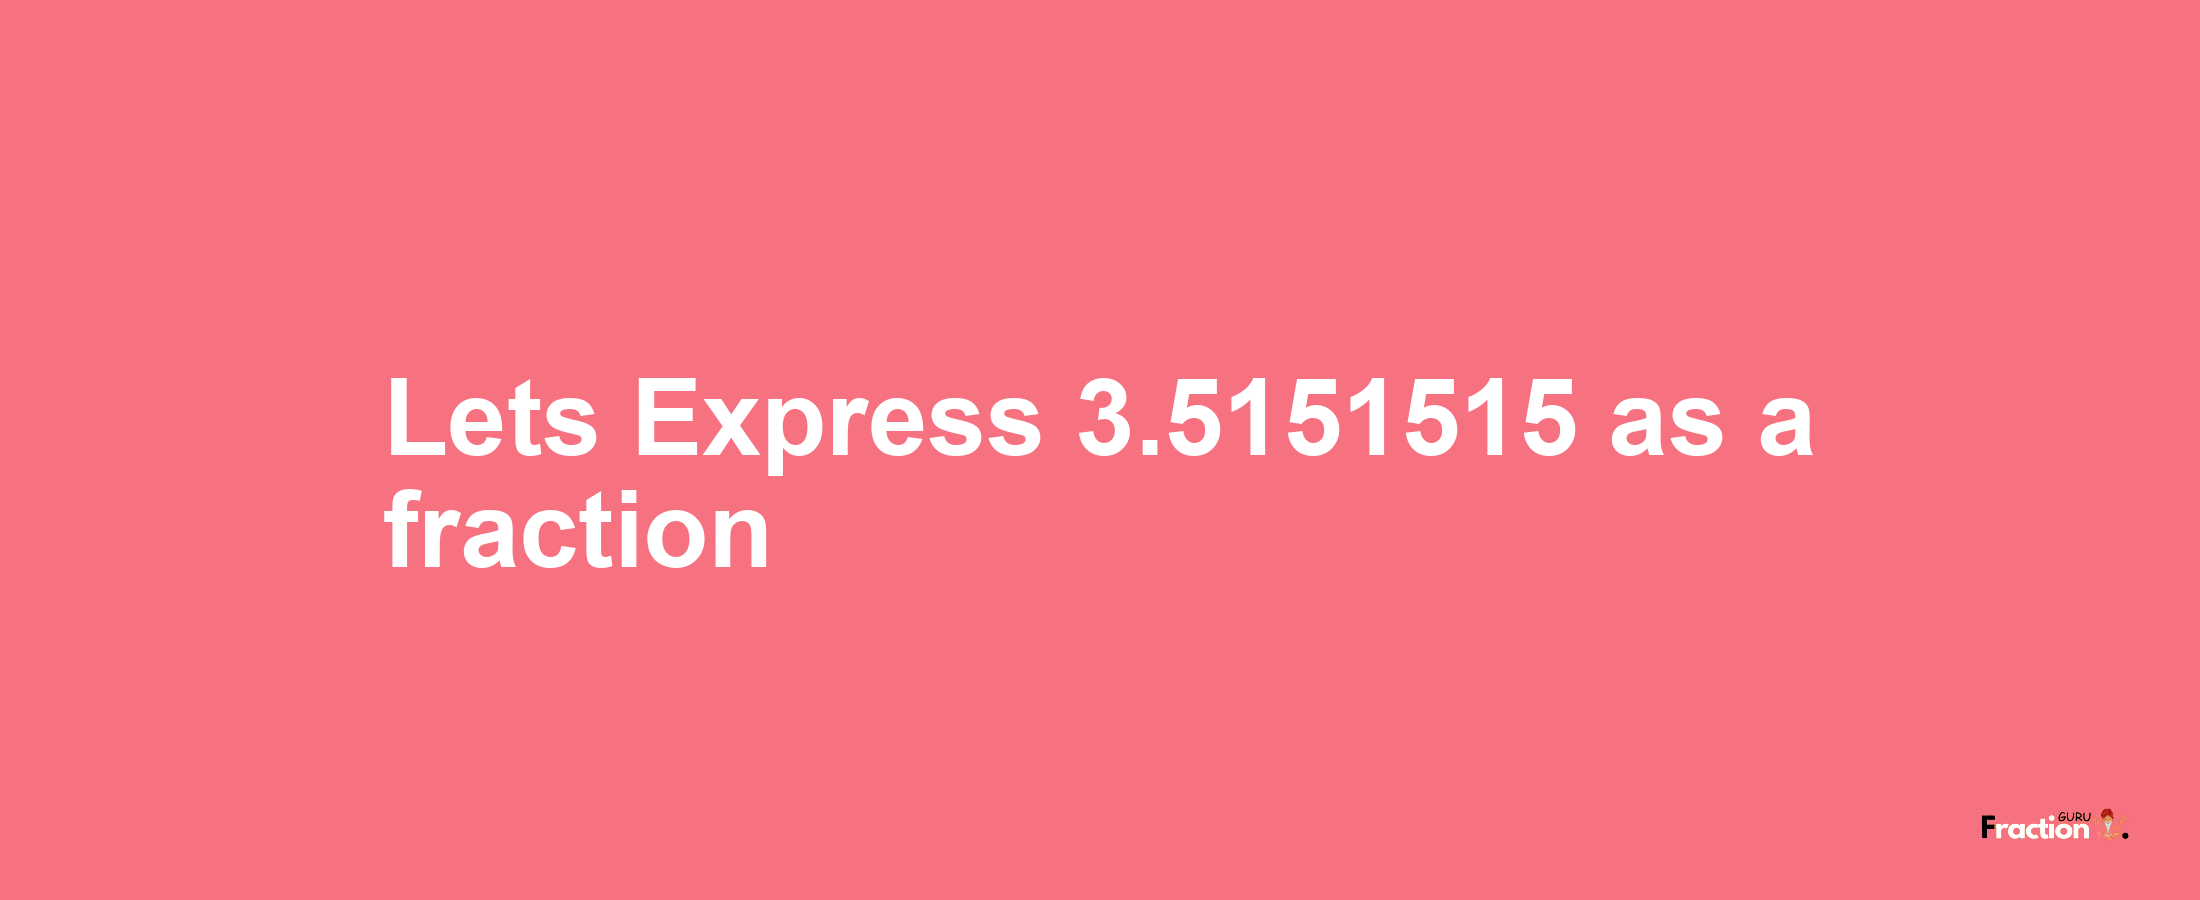 Lets Express 3.5151515 as afraction